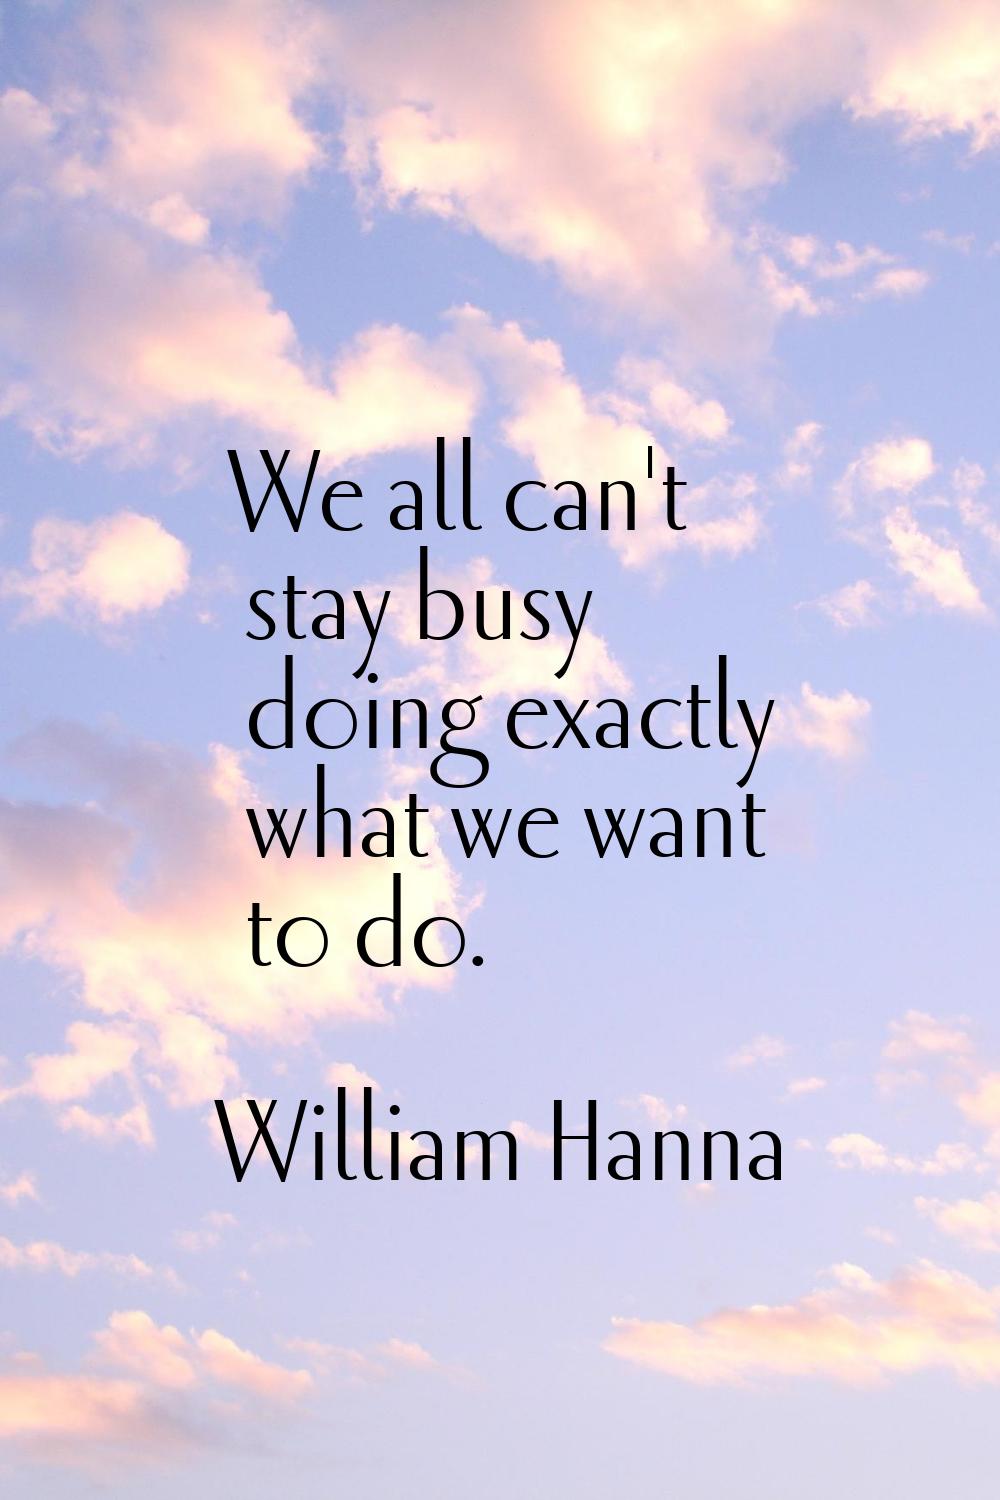 We all can't stay busy doing exactly what we want to do.